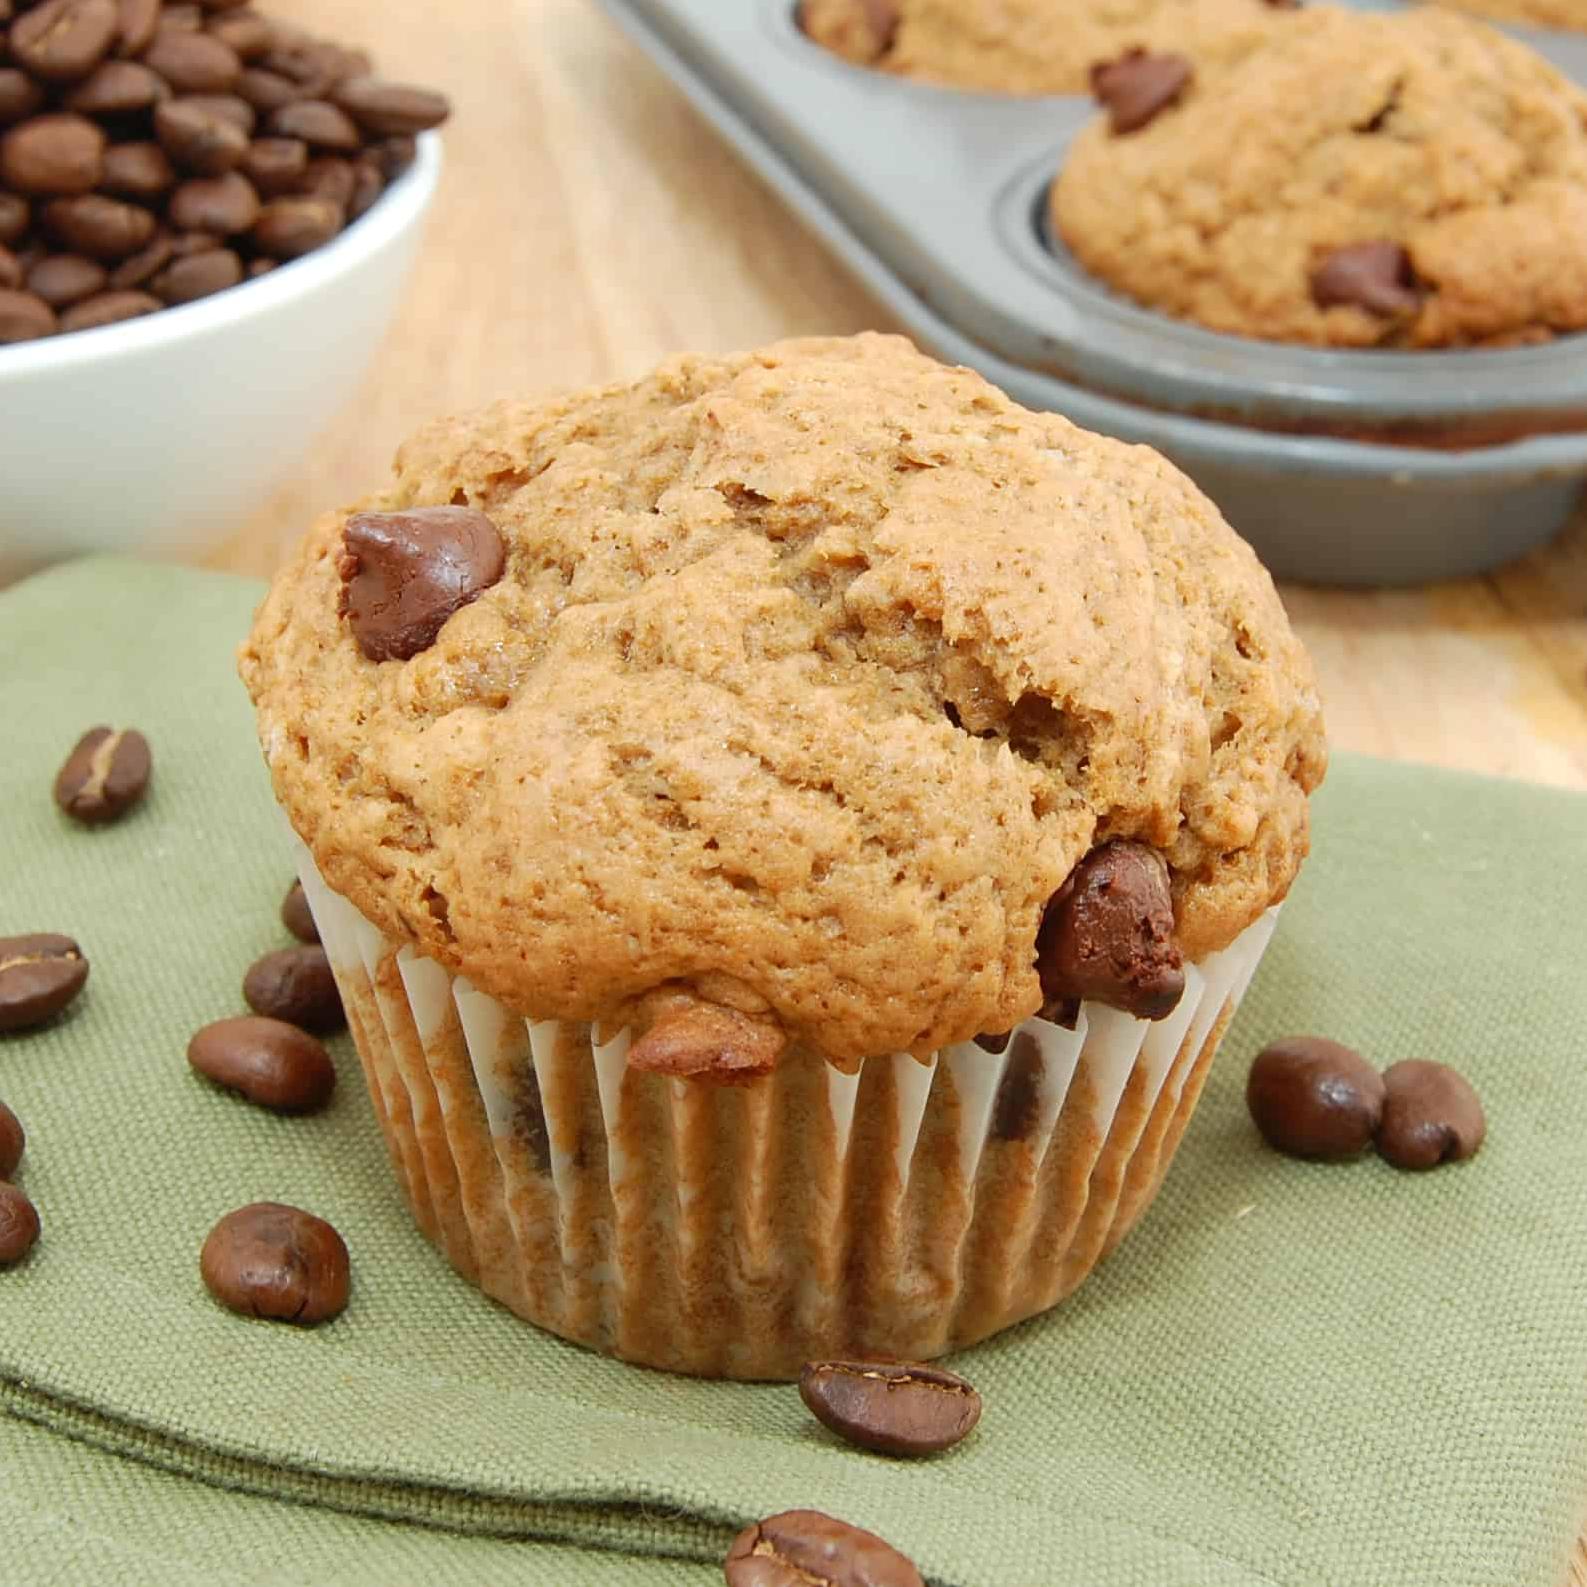  These coffee-infused muffins will satisfy your cravings for both caffeine and sweetness.